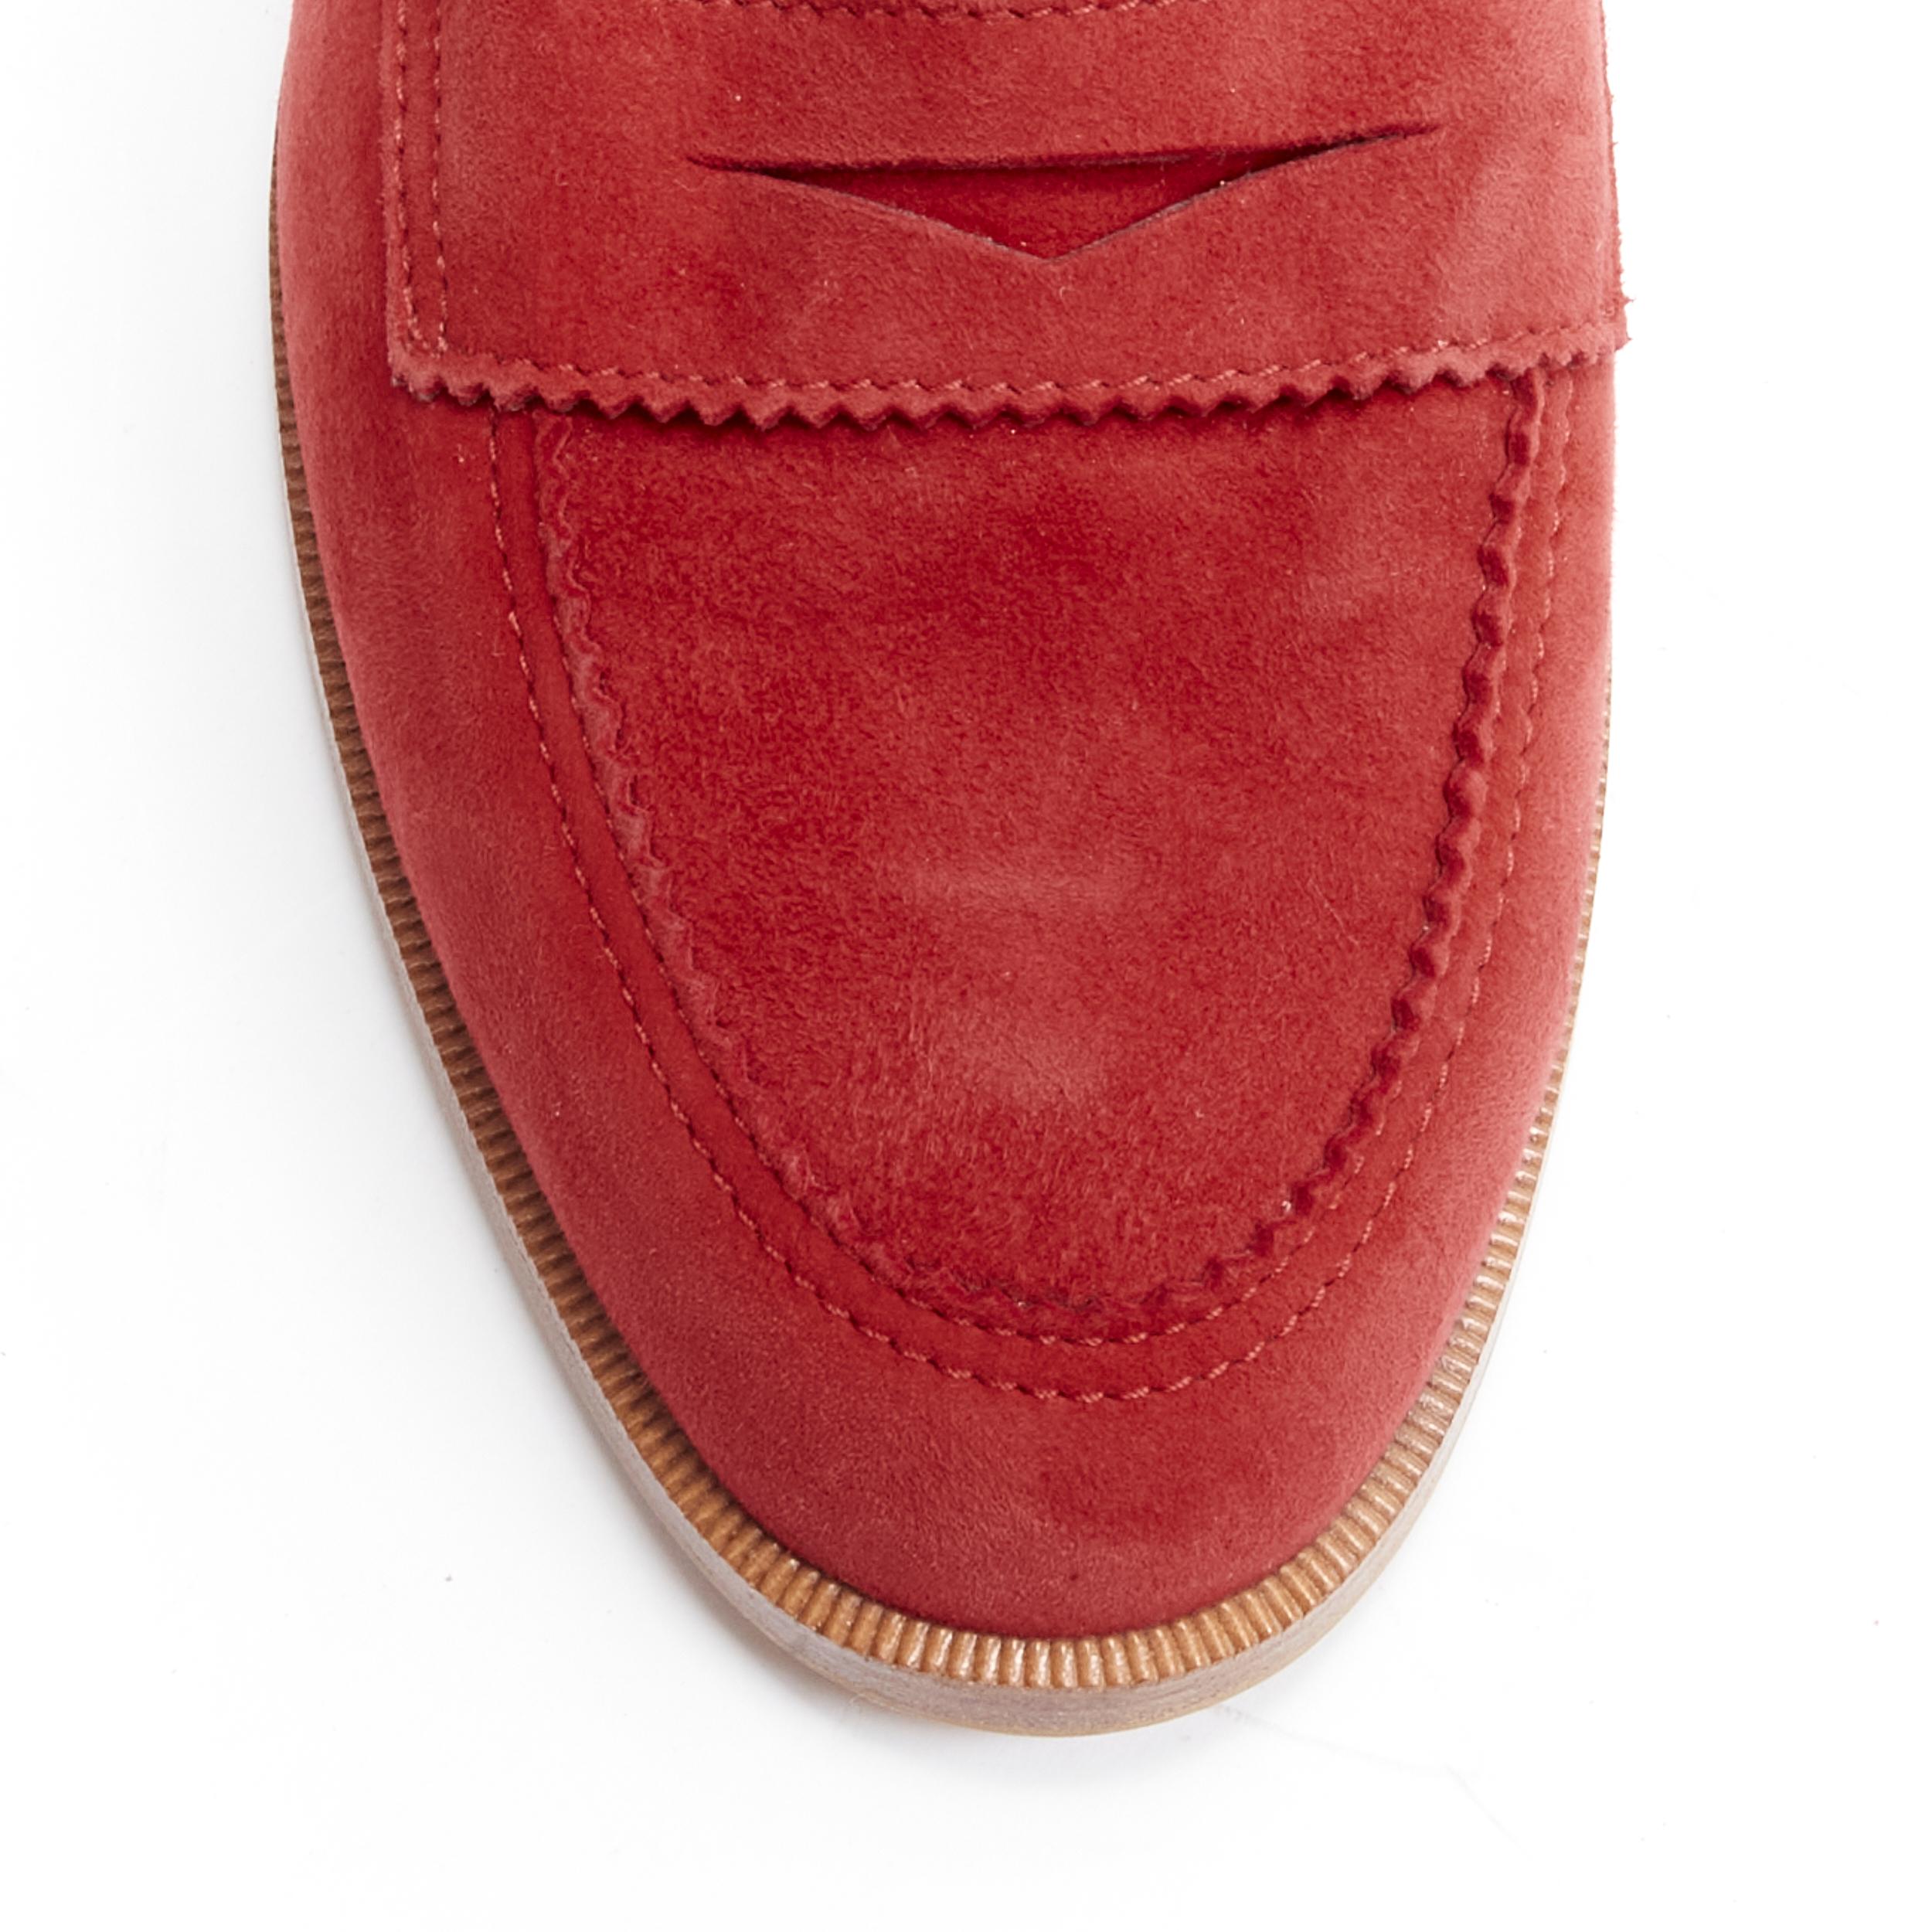 MANOLO BLAHNIK red suede leather classic penny loafer EU37 For Sale 1